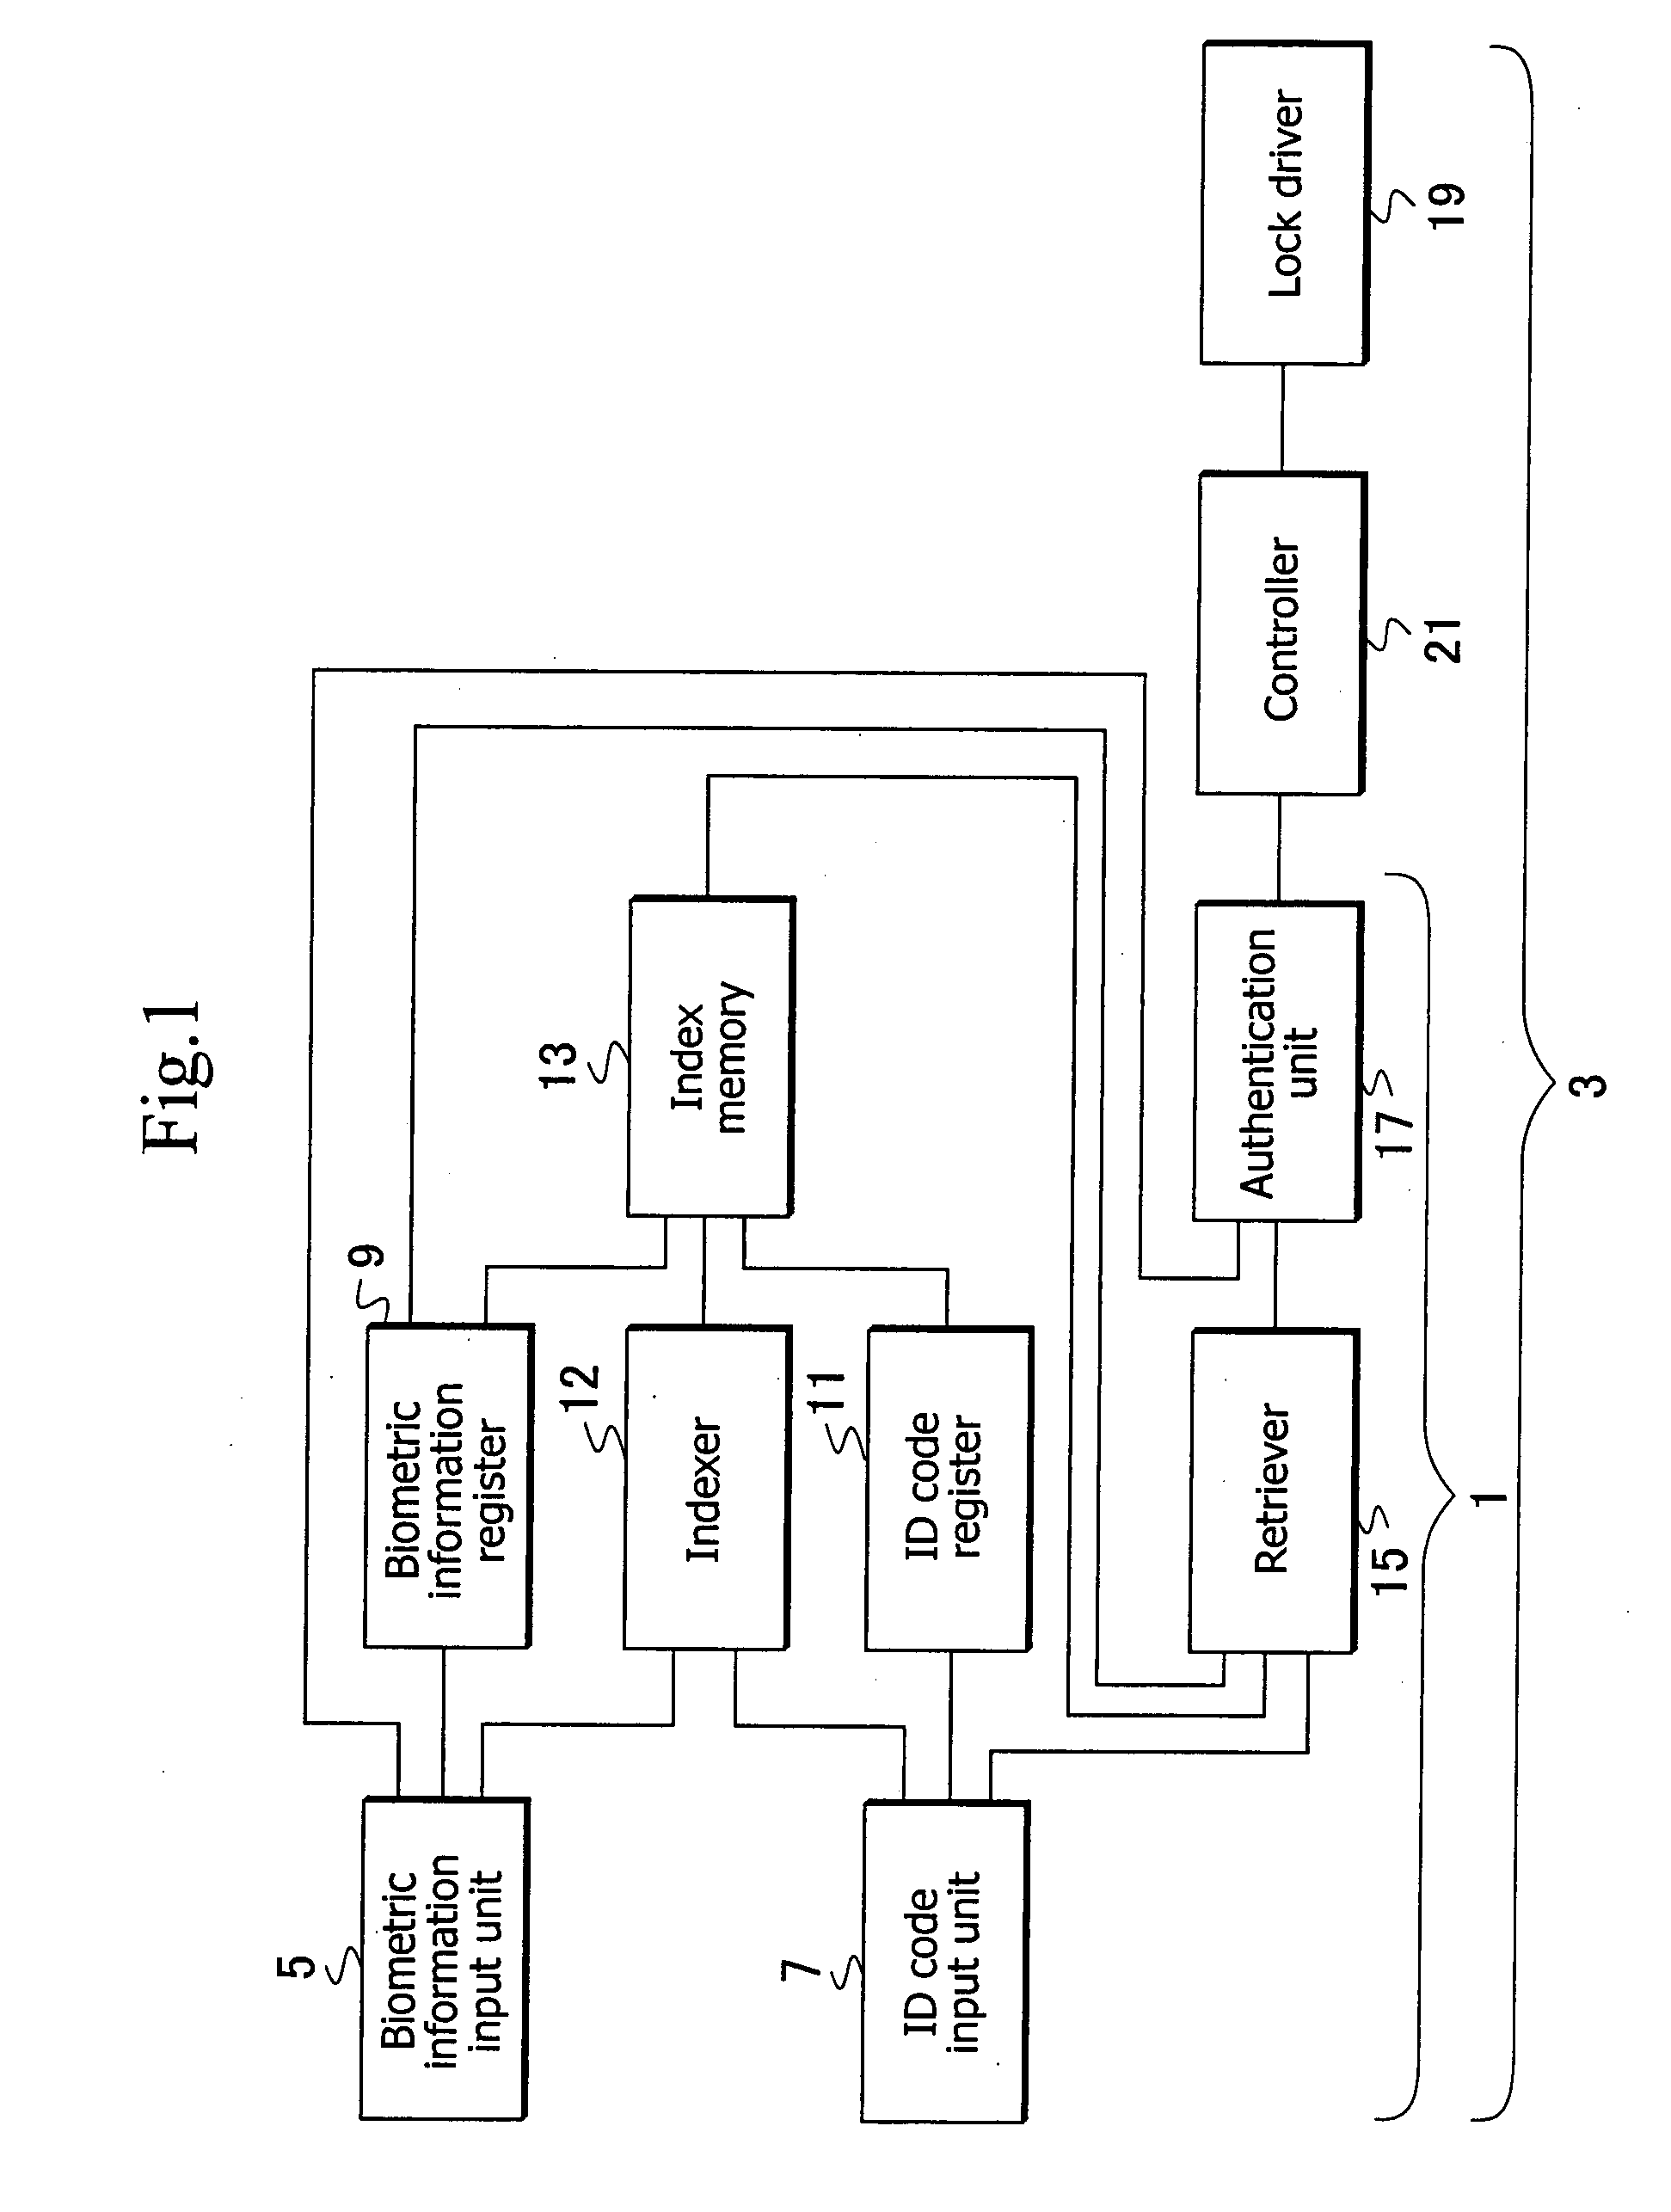 Personal authentication apparatus and locking apparatus